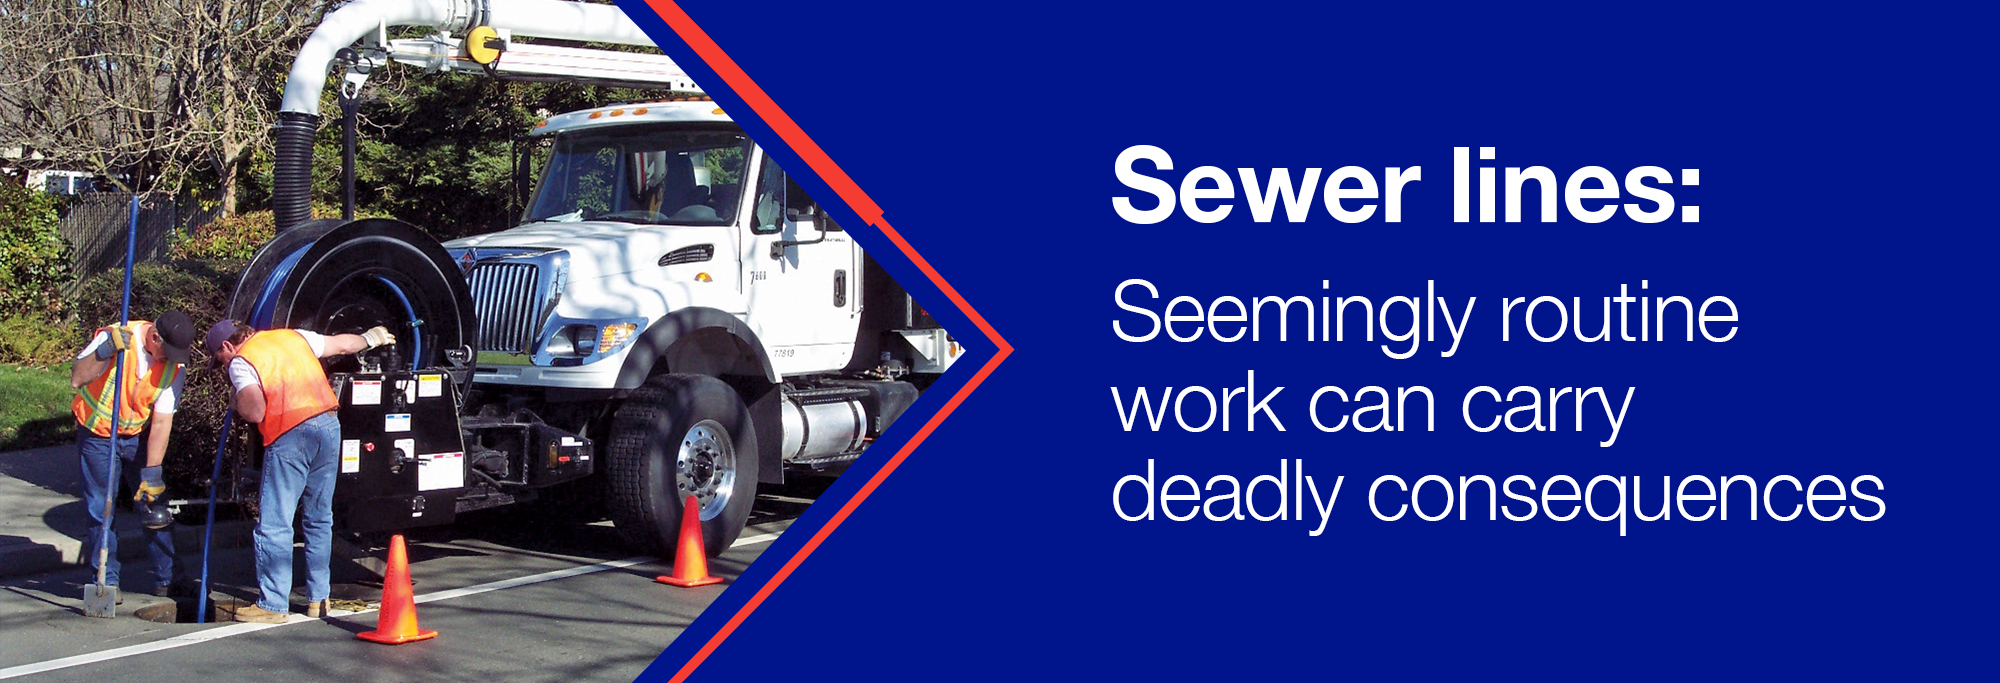 Sewer lines: Seemingly routing work can carry deadly consequences